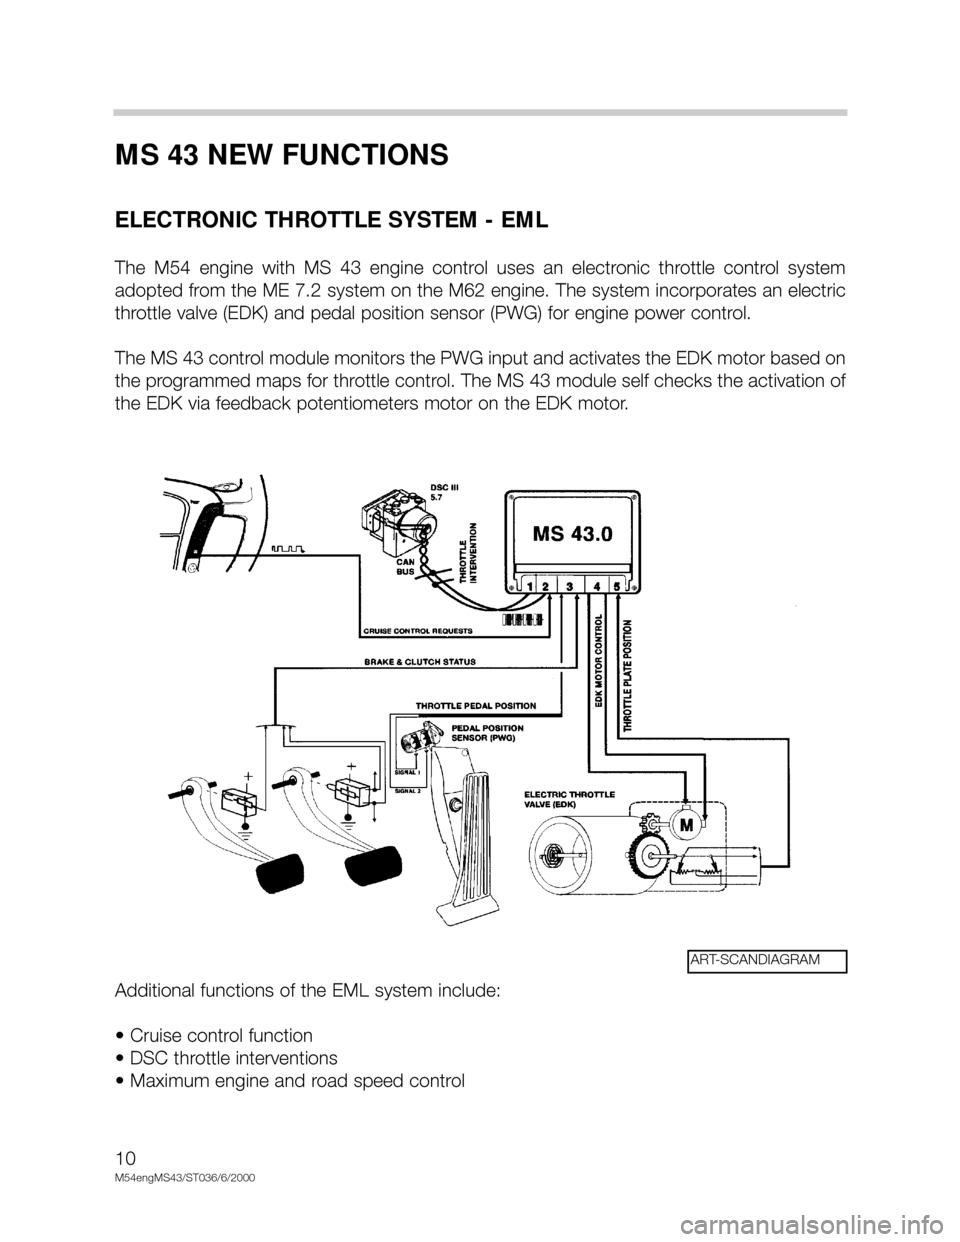 BMW X5 2006 E53 M54 Engine Workshop Manual 10
M54engMS43/ST036/6/2000
MS 43 NEW FUNCTIONS
ELECTRONIC THROTTLE SYSTEM - EML
The  M54  engine  with  MS  43  engine  control  uses  an  electronic  throttle  control  system
adopted from the ME 7.2